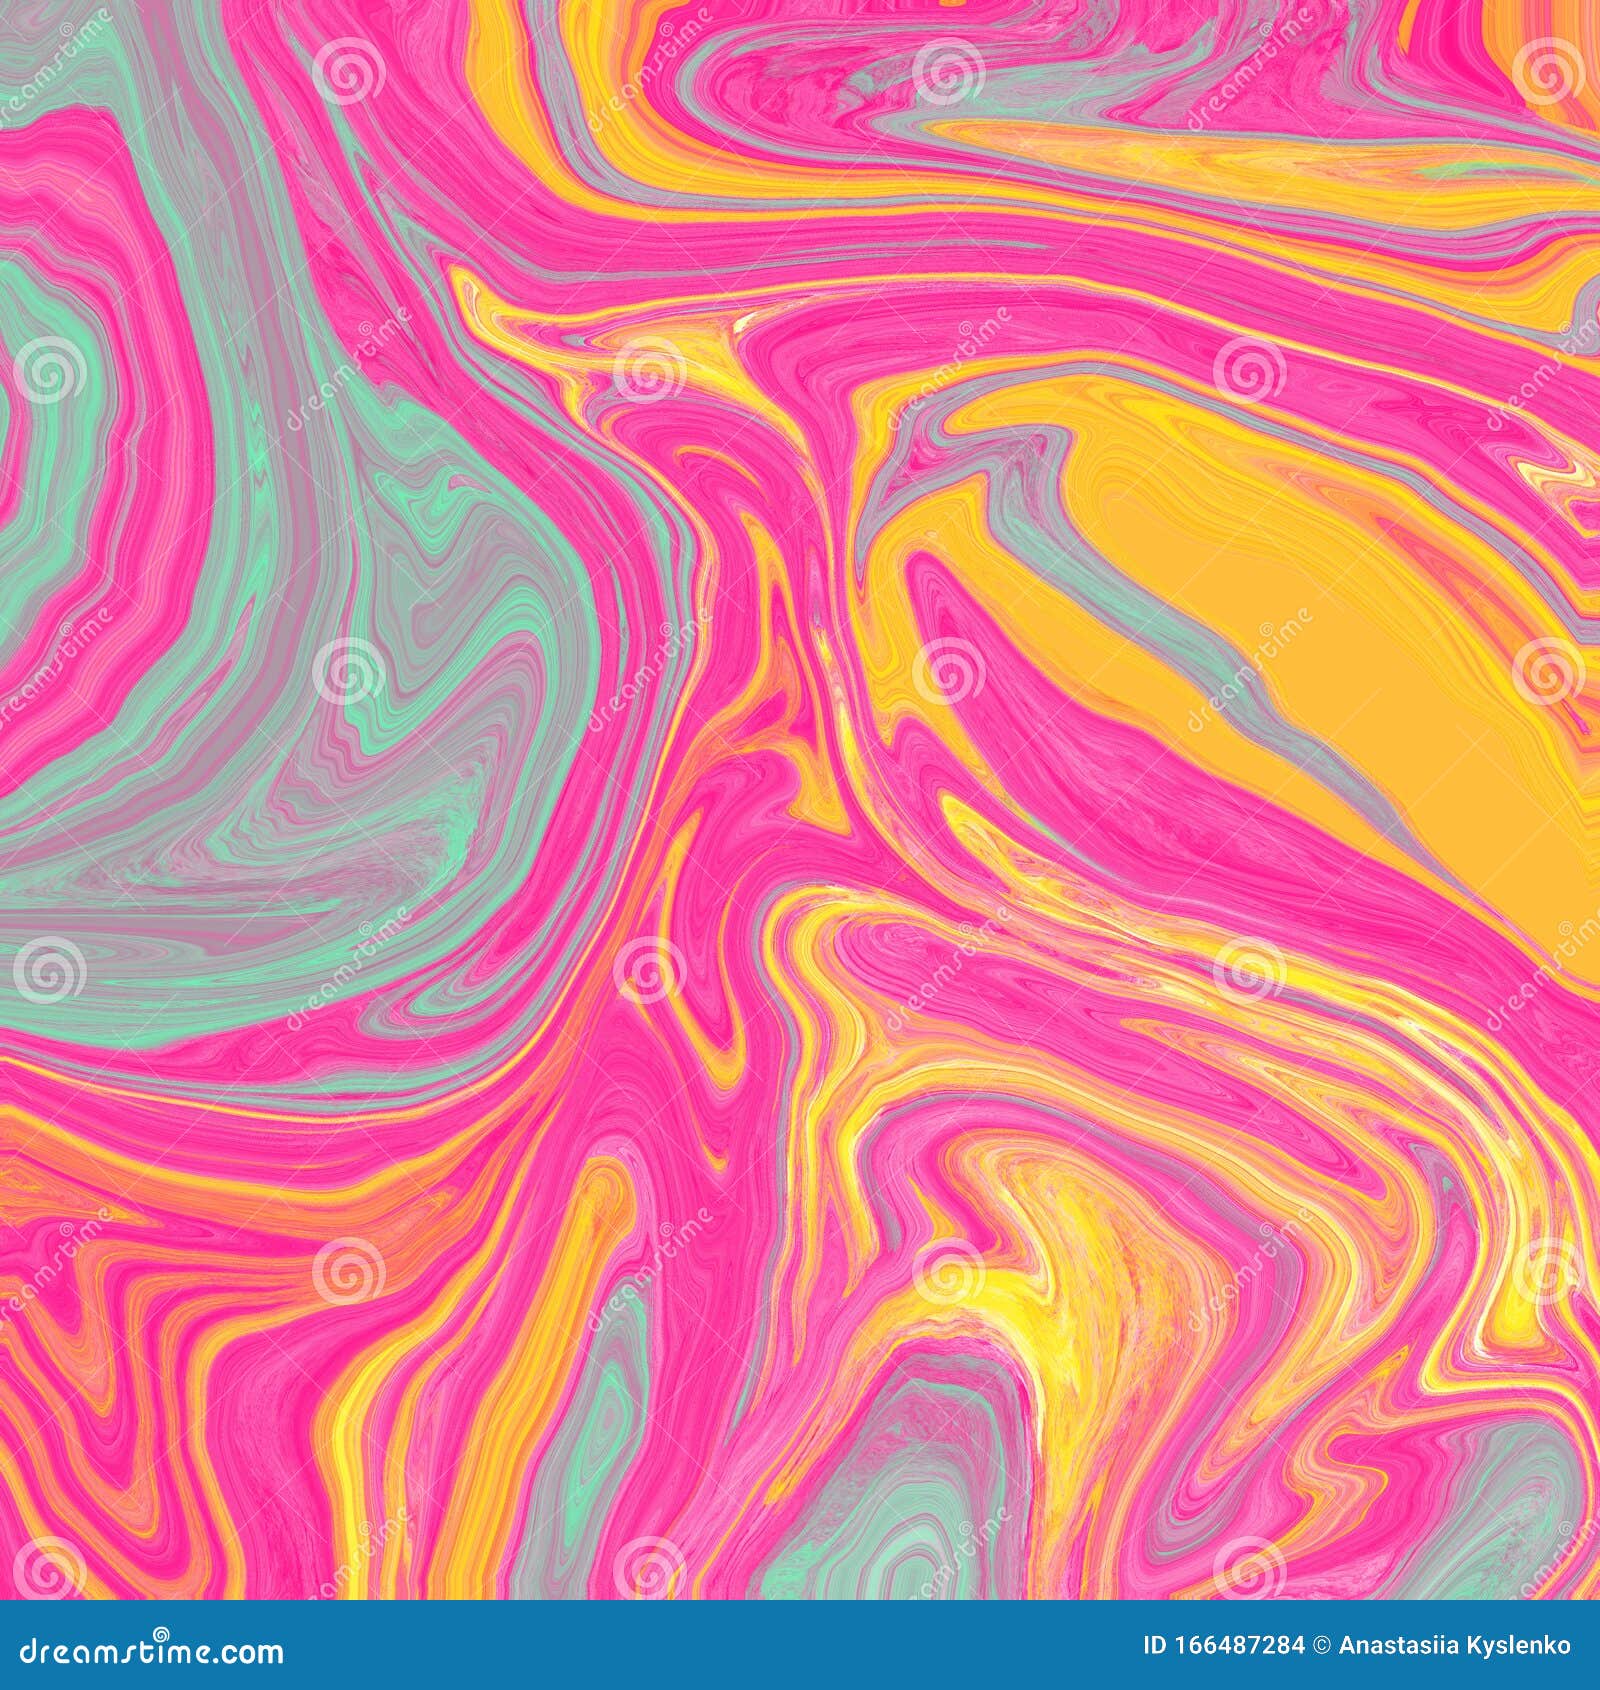 abstract background. marble stone pink yellow blue wave  pattern. raster cool banner, cover liquid paint. hand drawn trendy